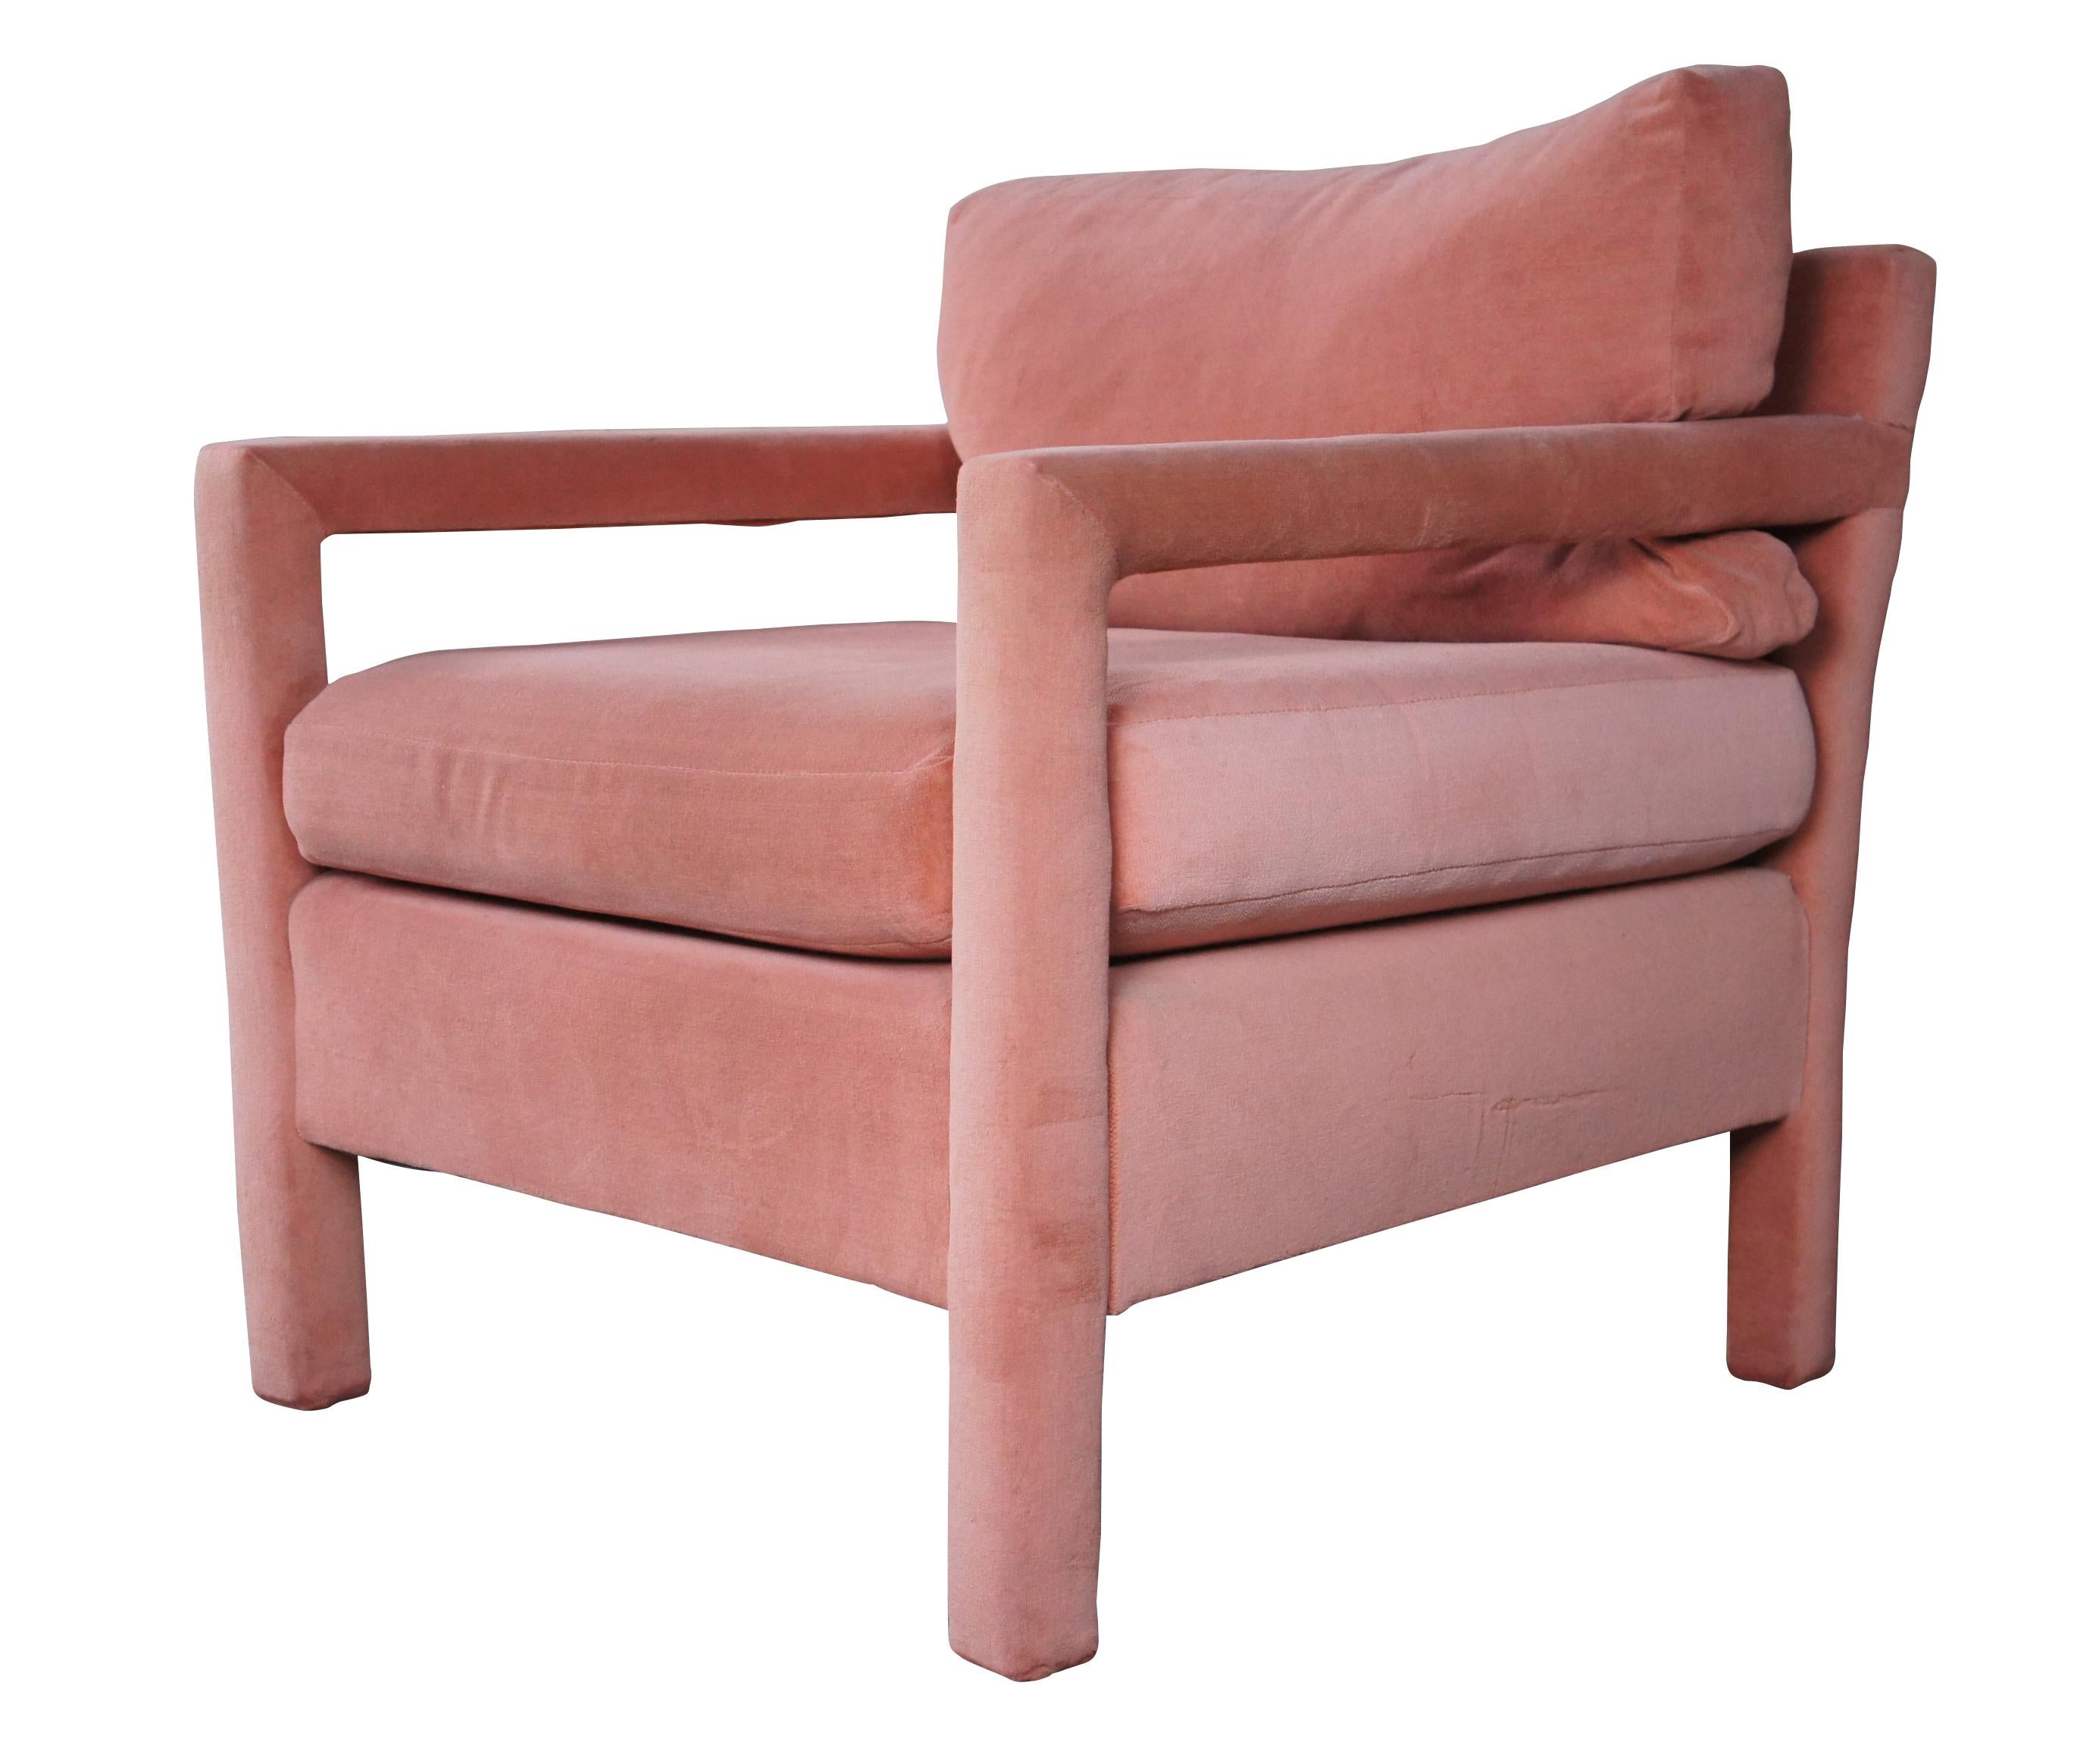 An eye catching Parsons style chair attributed to Milo Baughman for Thayer Coggins, circa 1970s. Features a cubed frame upholstered in a posh pink mohair.